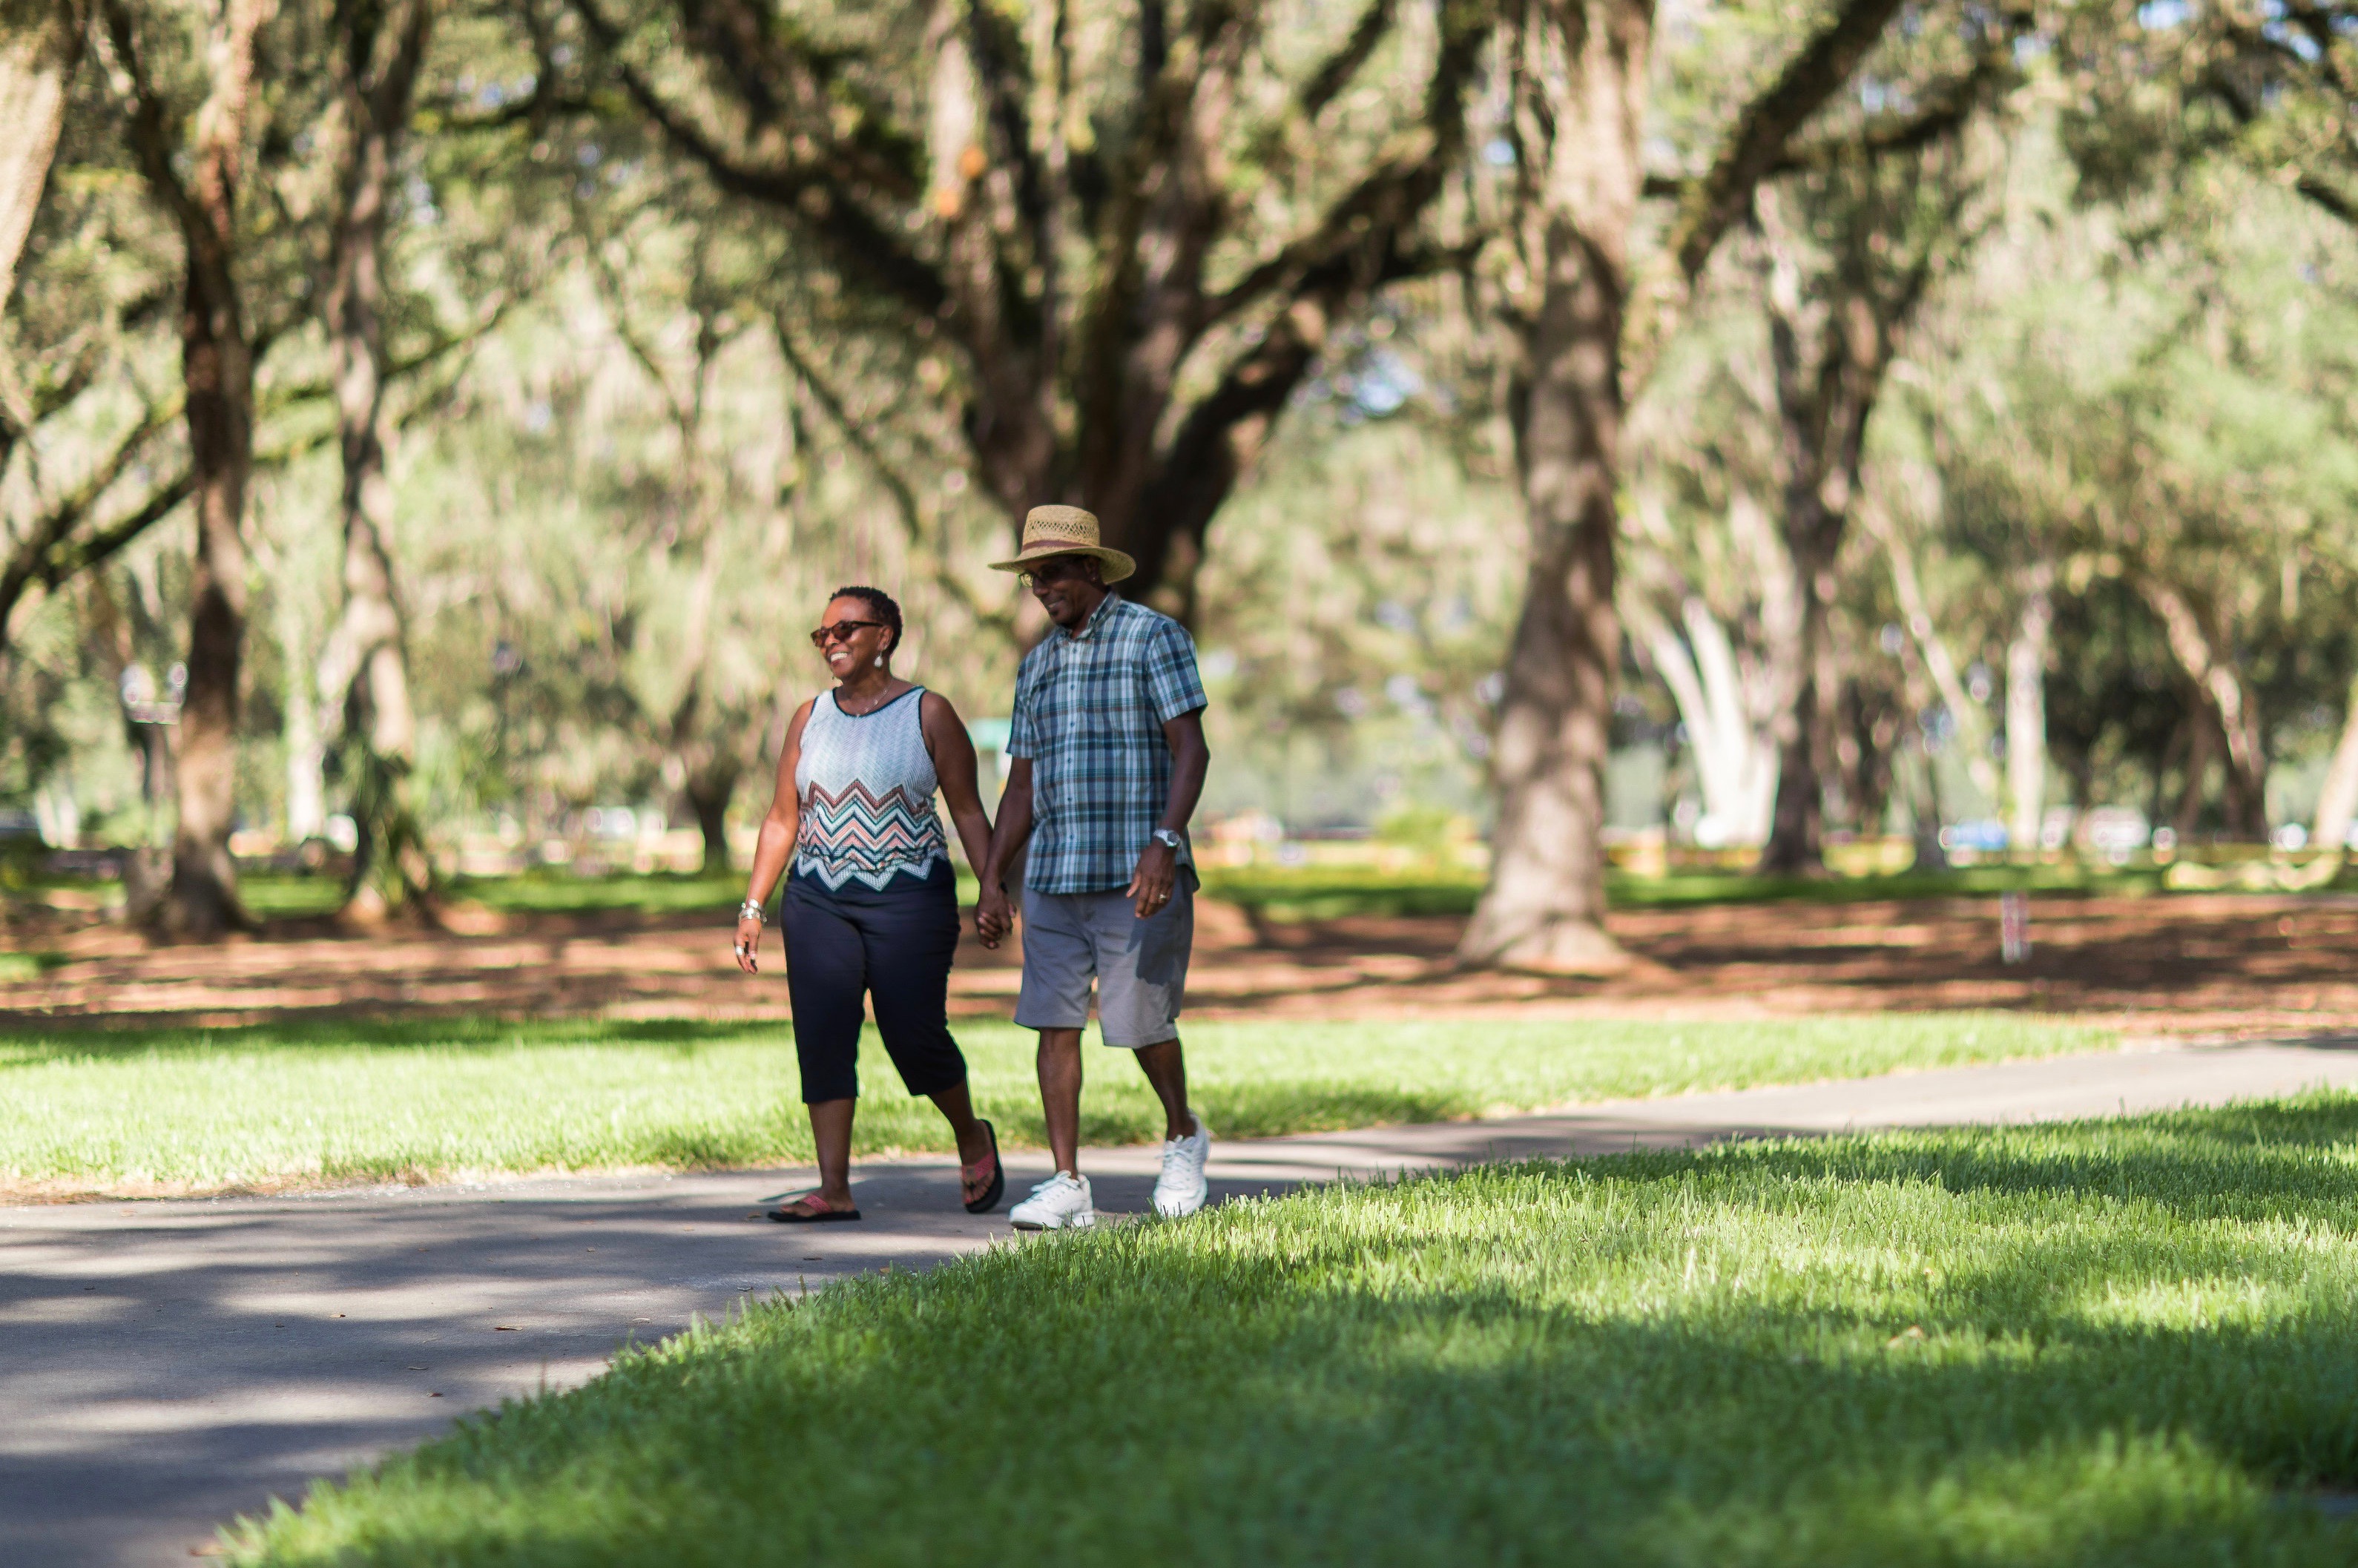 couple holding hands, smiling, walking on a paved path in sunny park with green grass on either side of path. Trees blurred in background